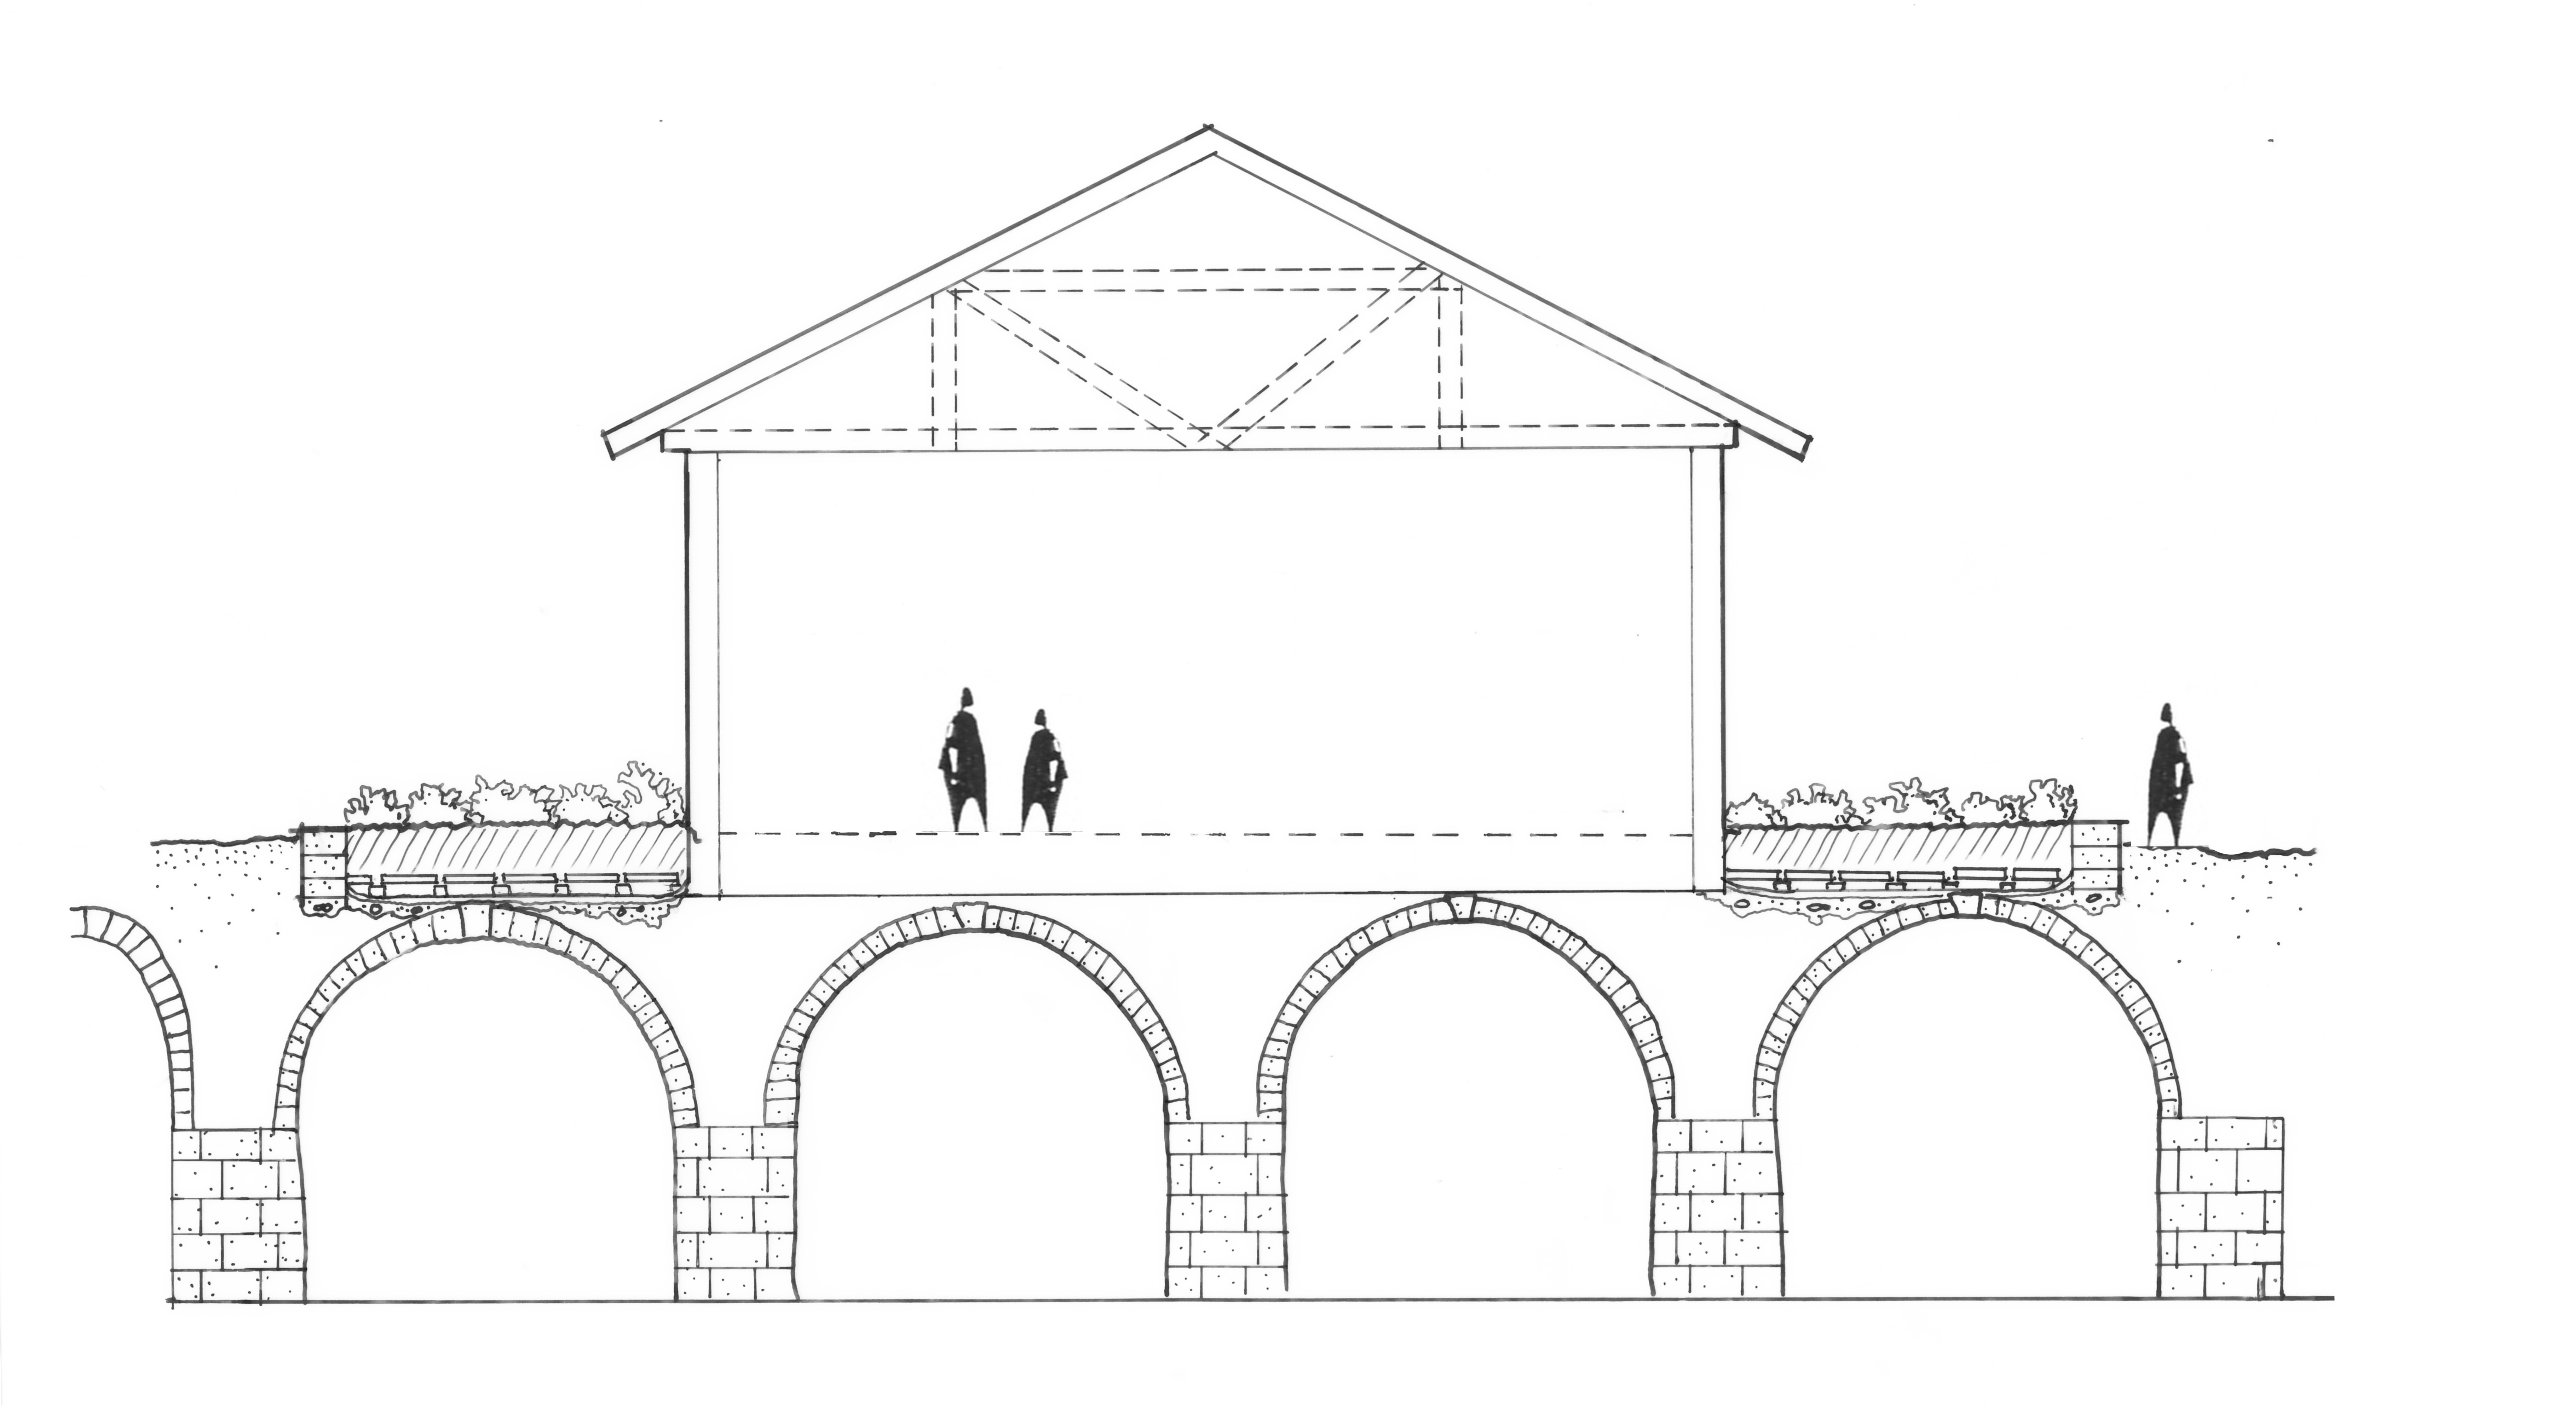 Fig. 2: Reconstructed section of vaults and planting area showing roof garden construction (E. Clemence after J. Patrich)